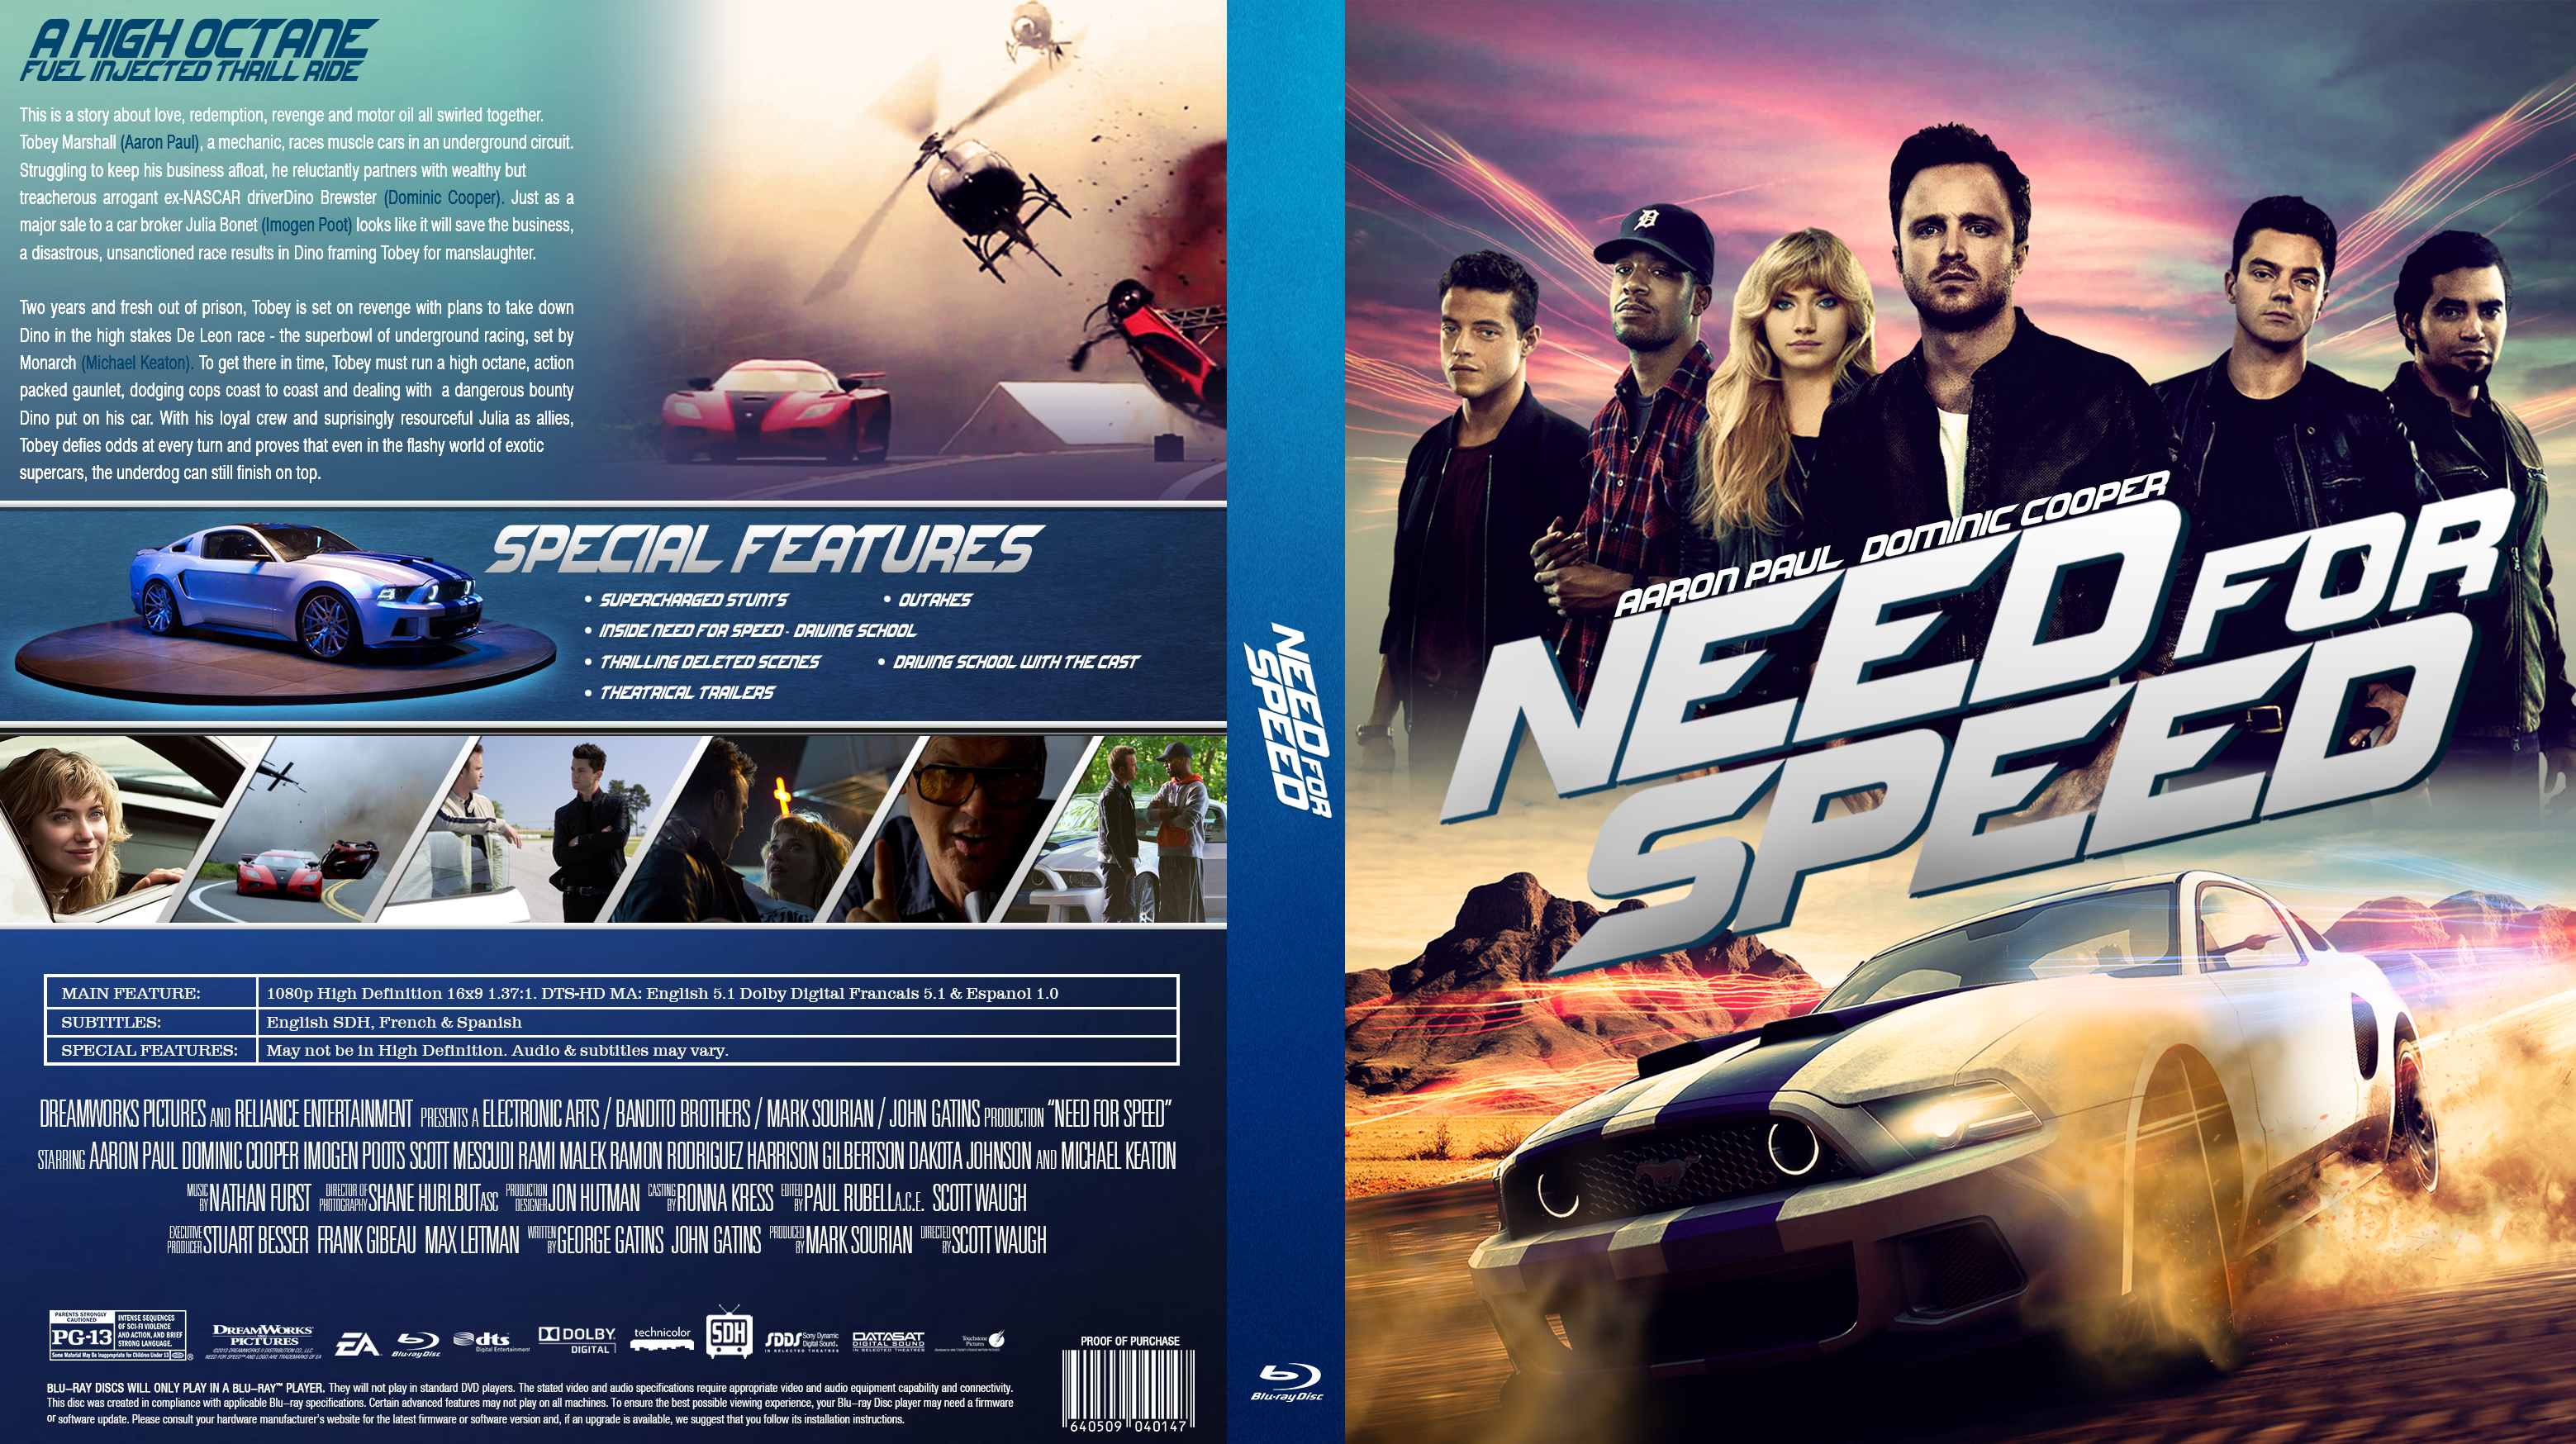 Need for speed torrent download bluray les paysans kaamelott torrent